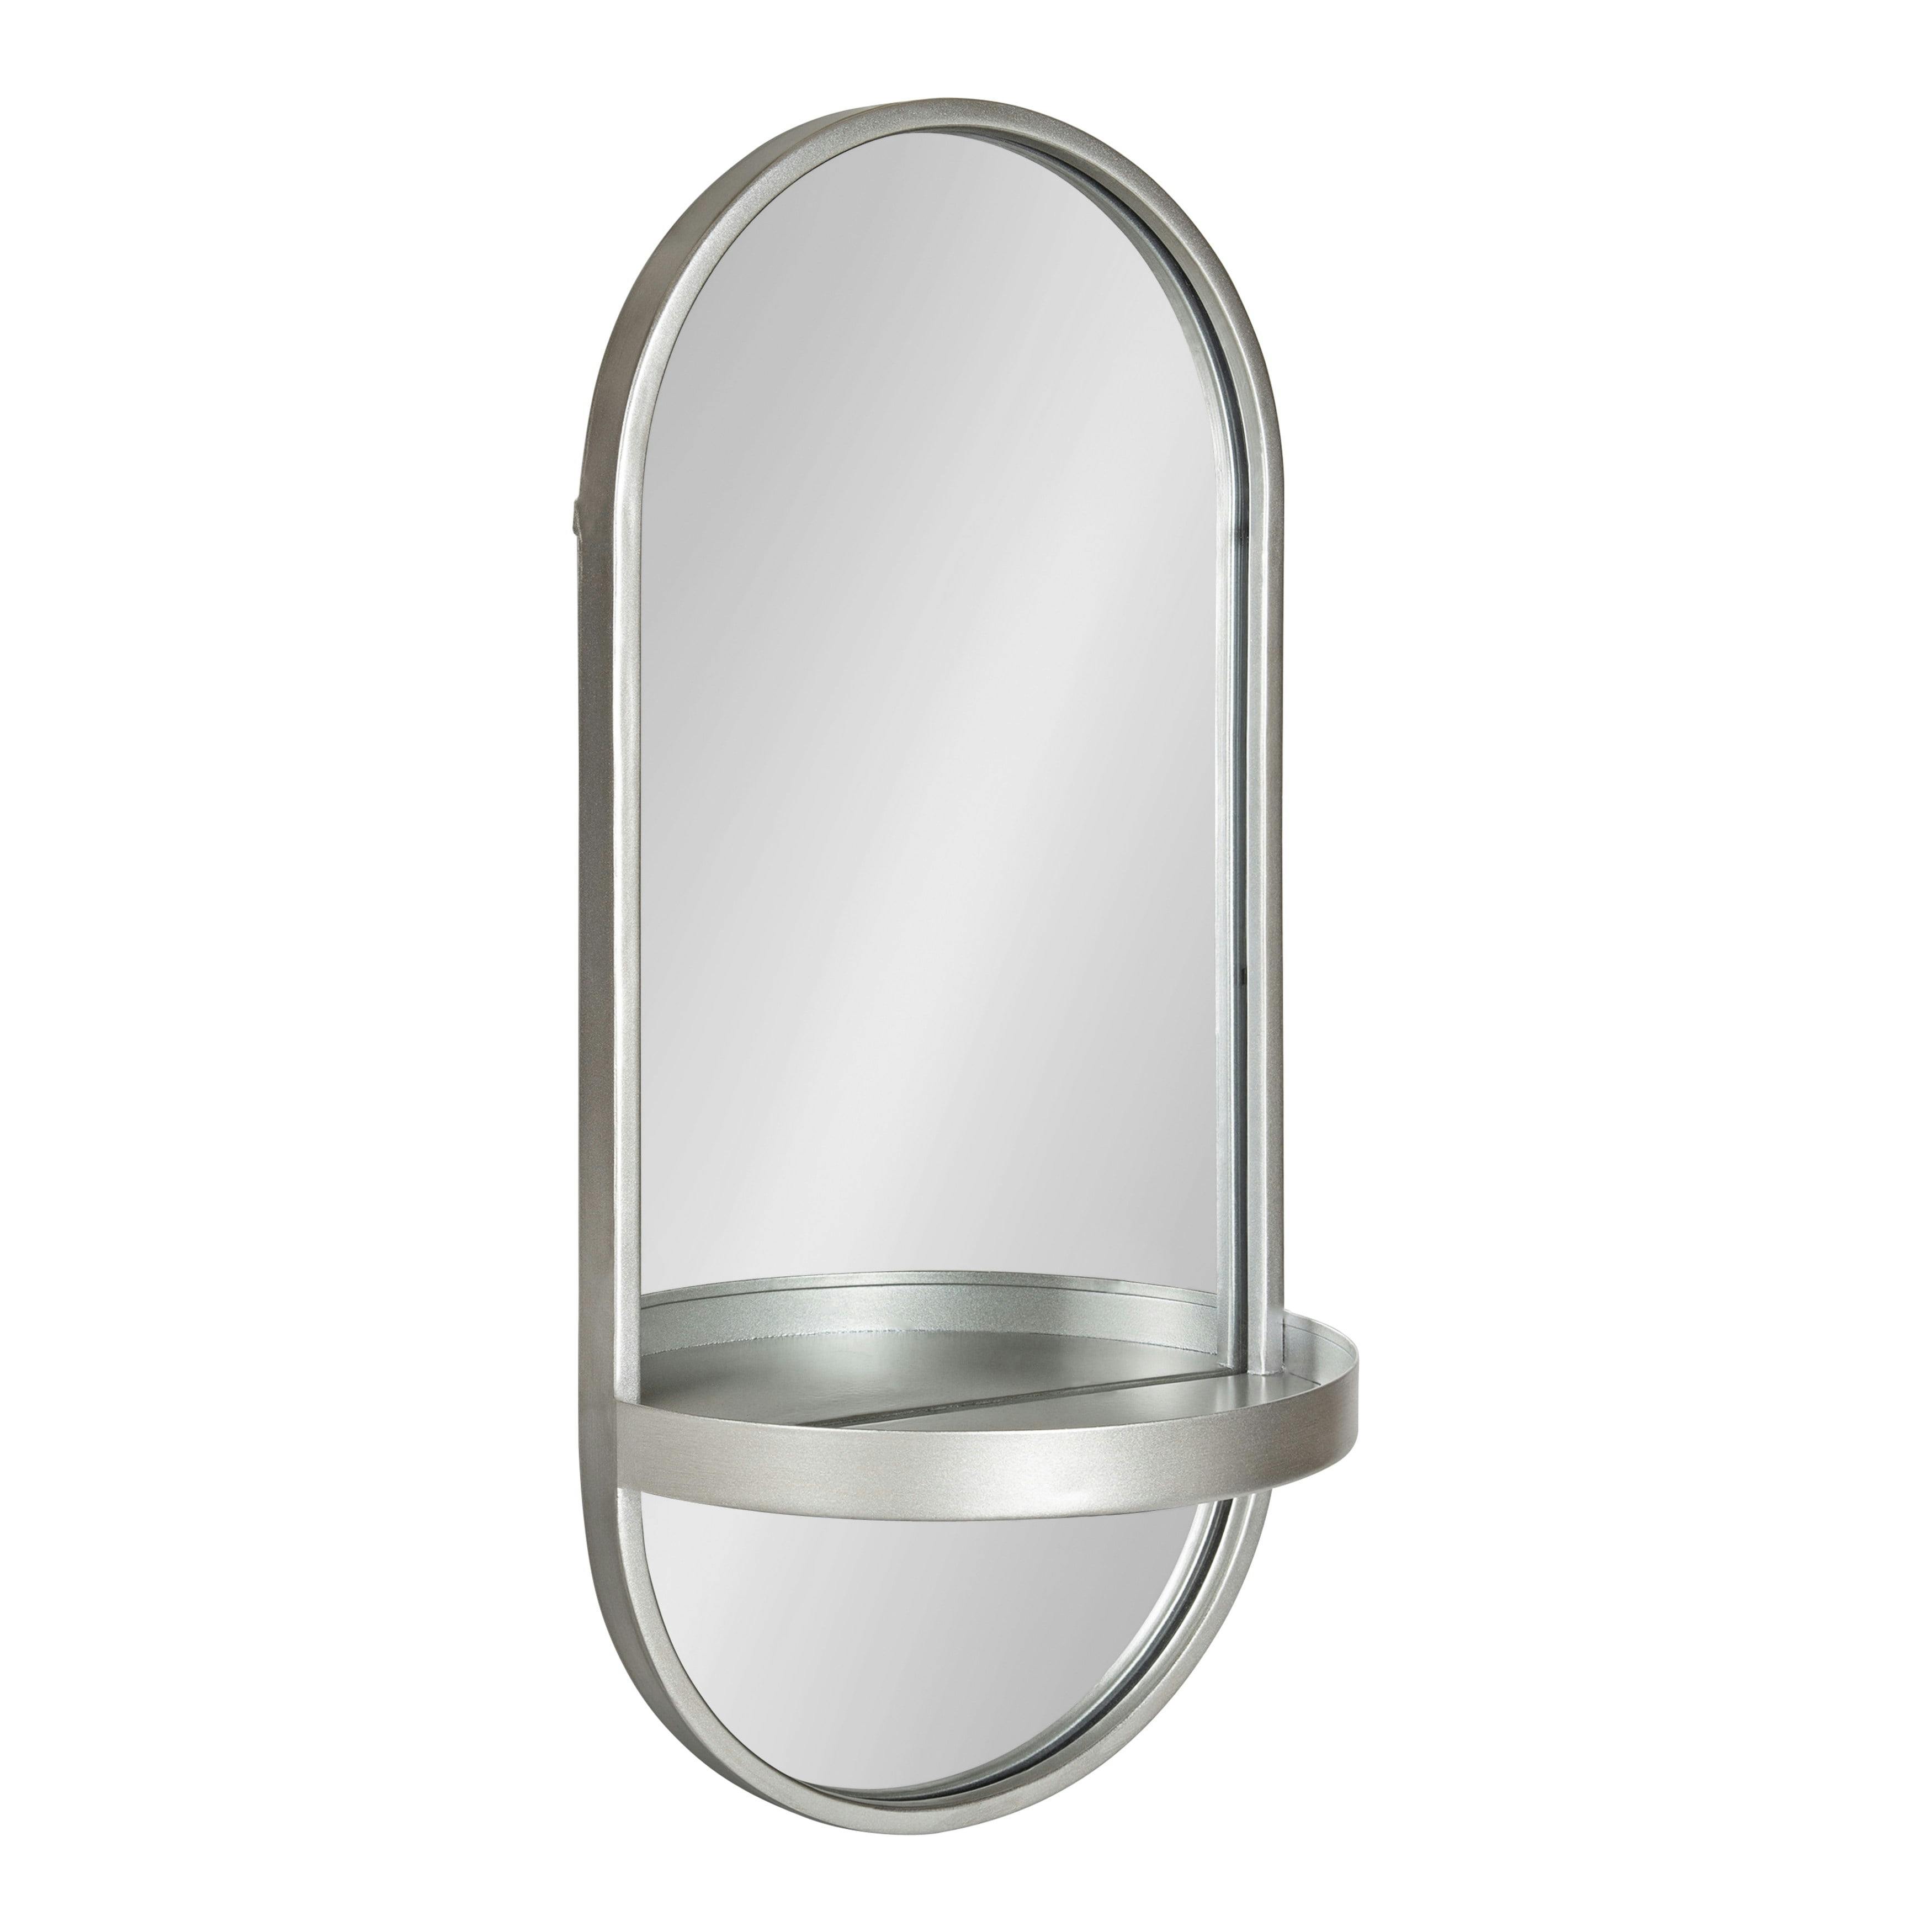 Estero 24"x11" Silver Metal Oval Wall Mirror with Functional Shelf